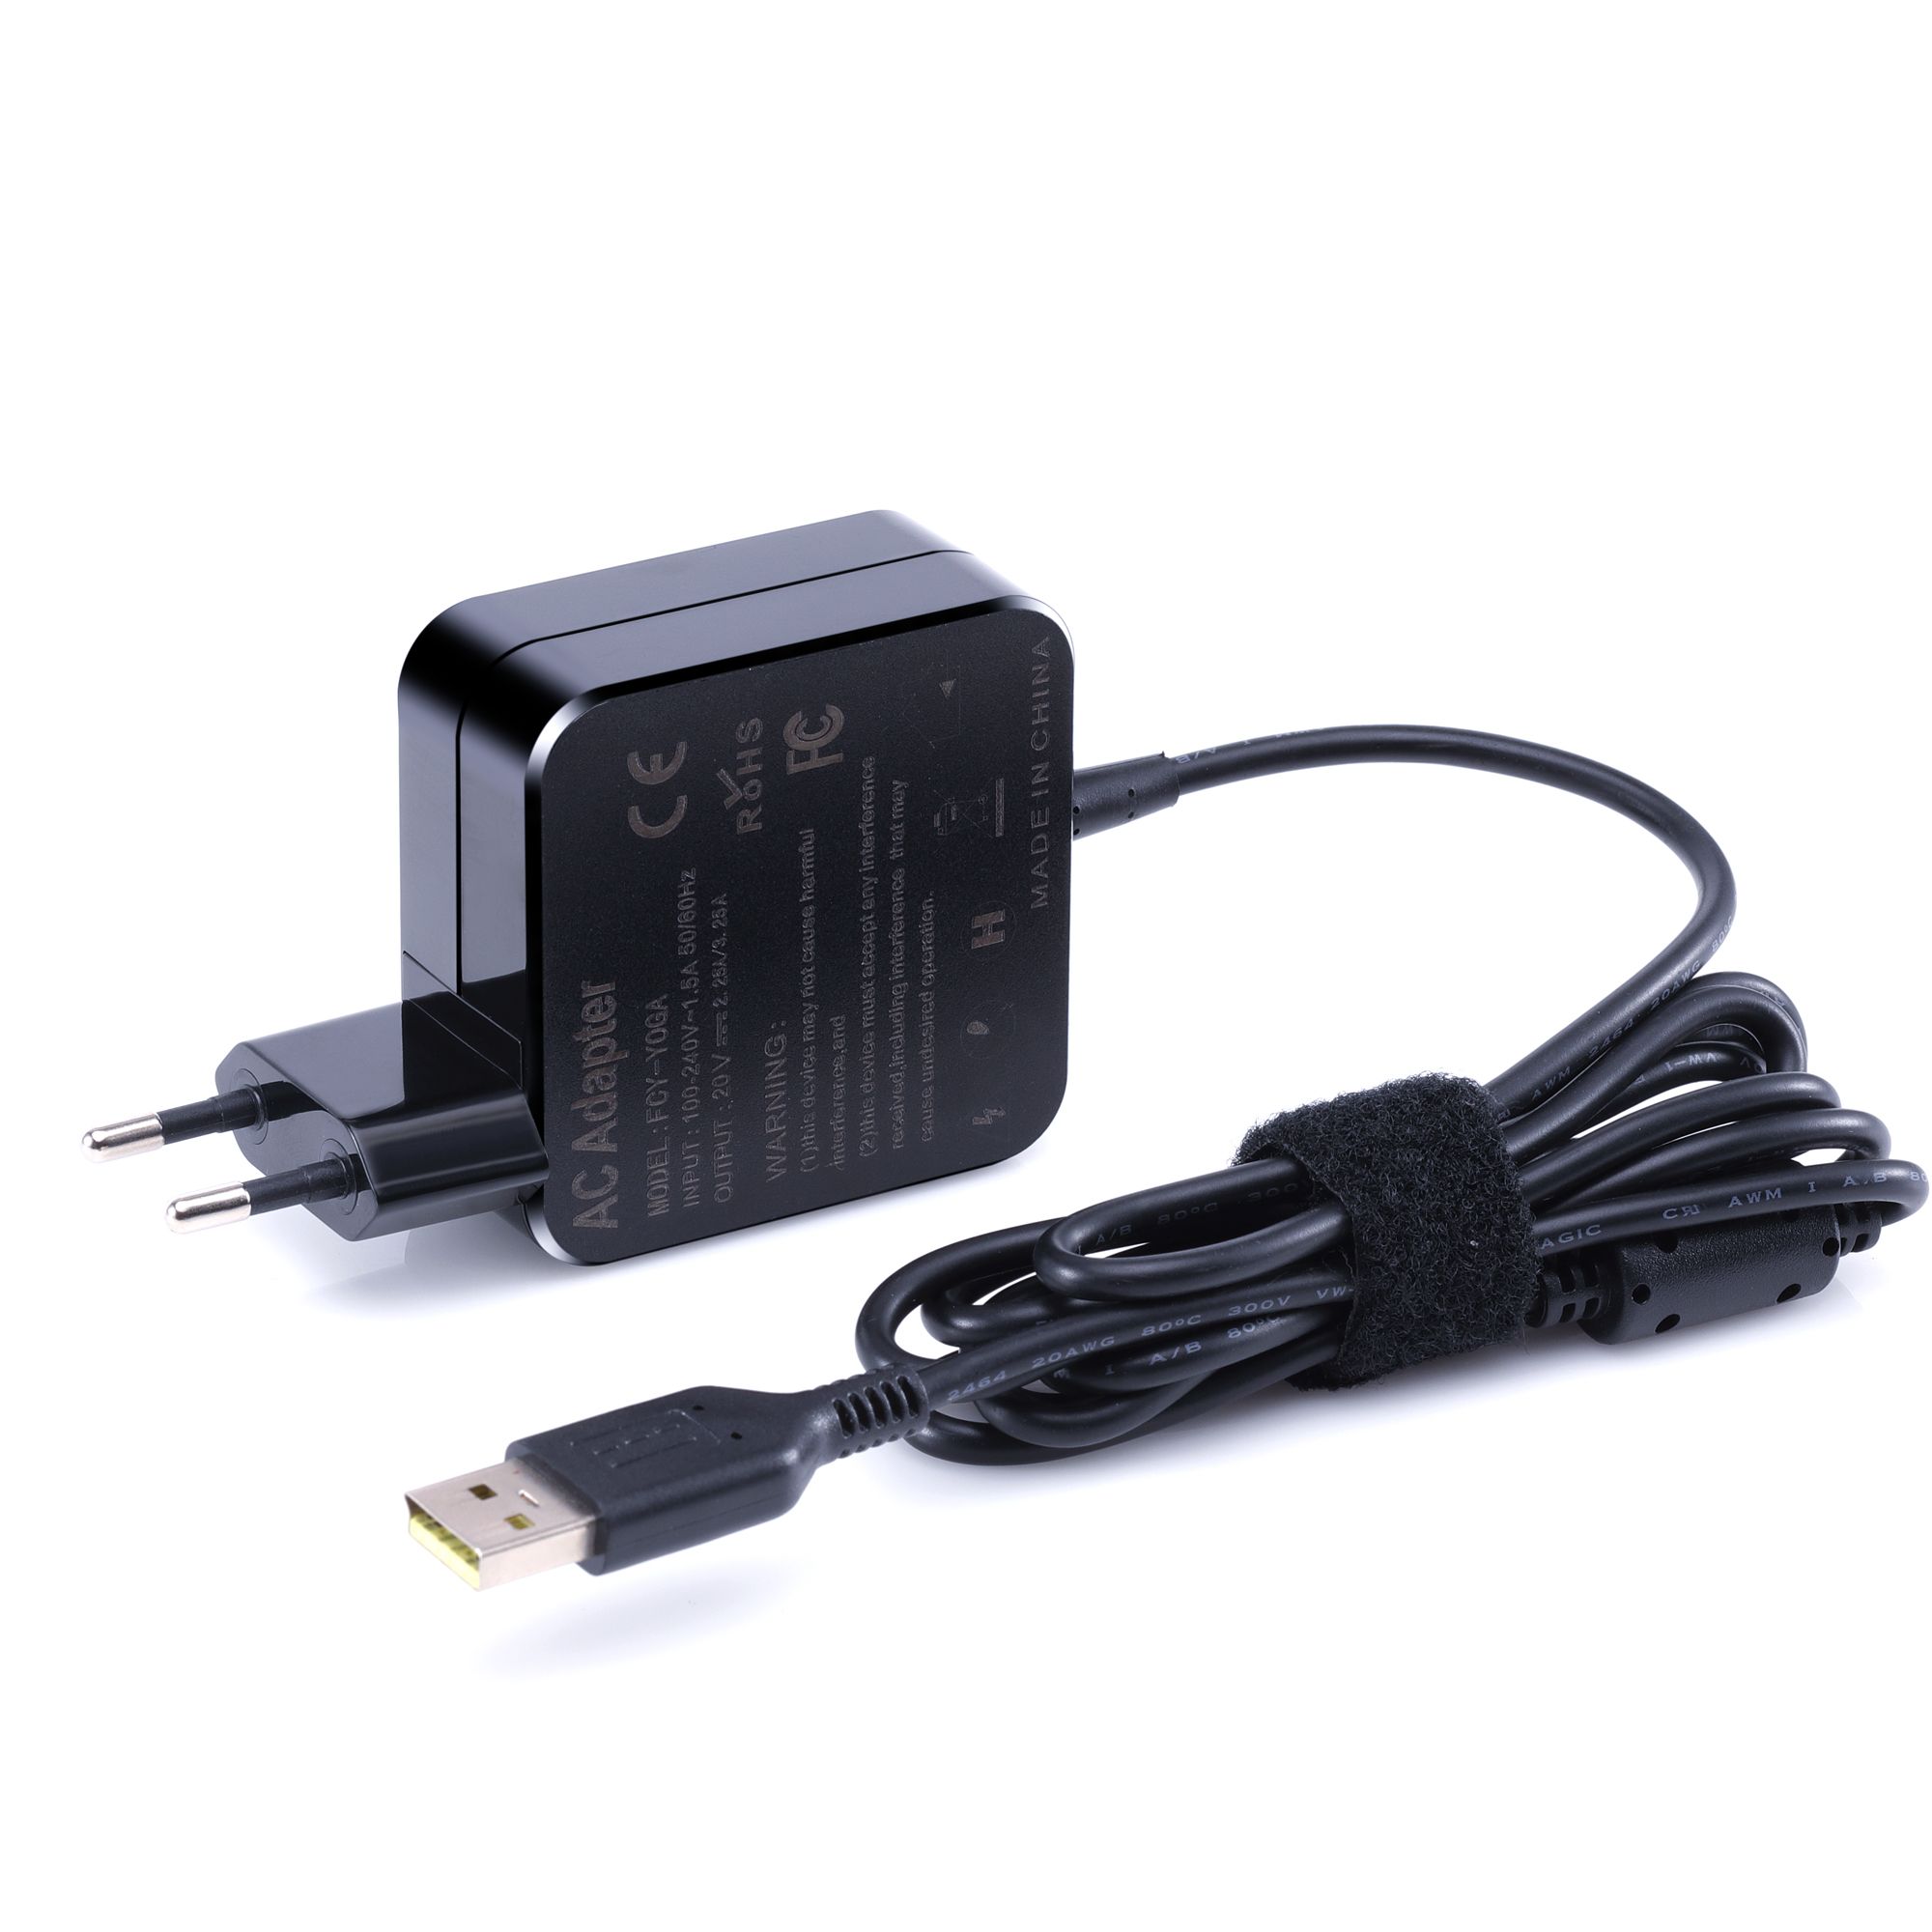 Fothwin-20V-325A-65W-Interface-Yoga-3-14-Yoga-900-700-Laptop-AC-Power-Adapter-Notebook-Charger-For-L-1454298